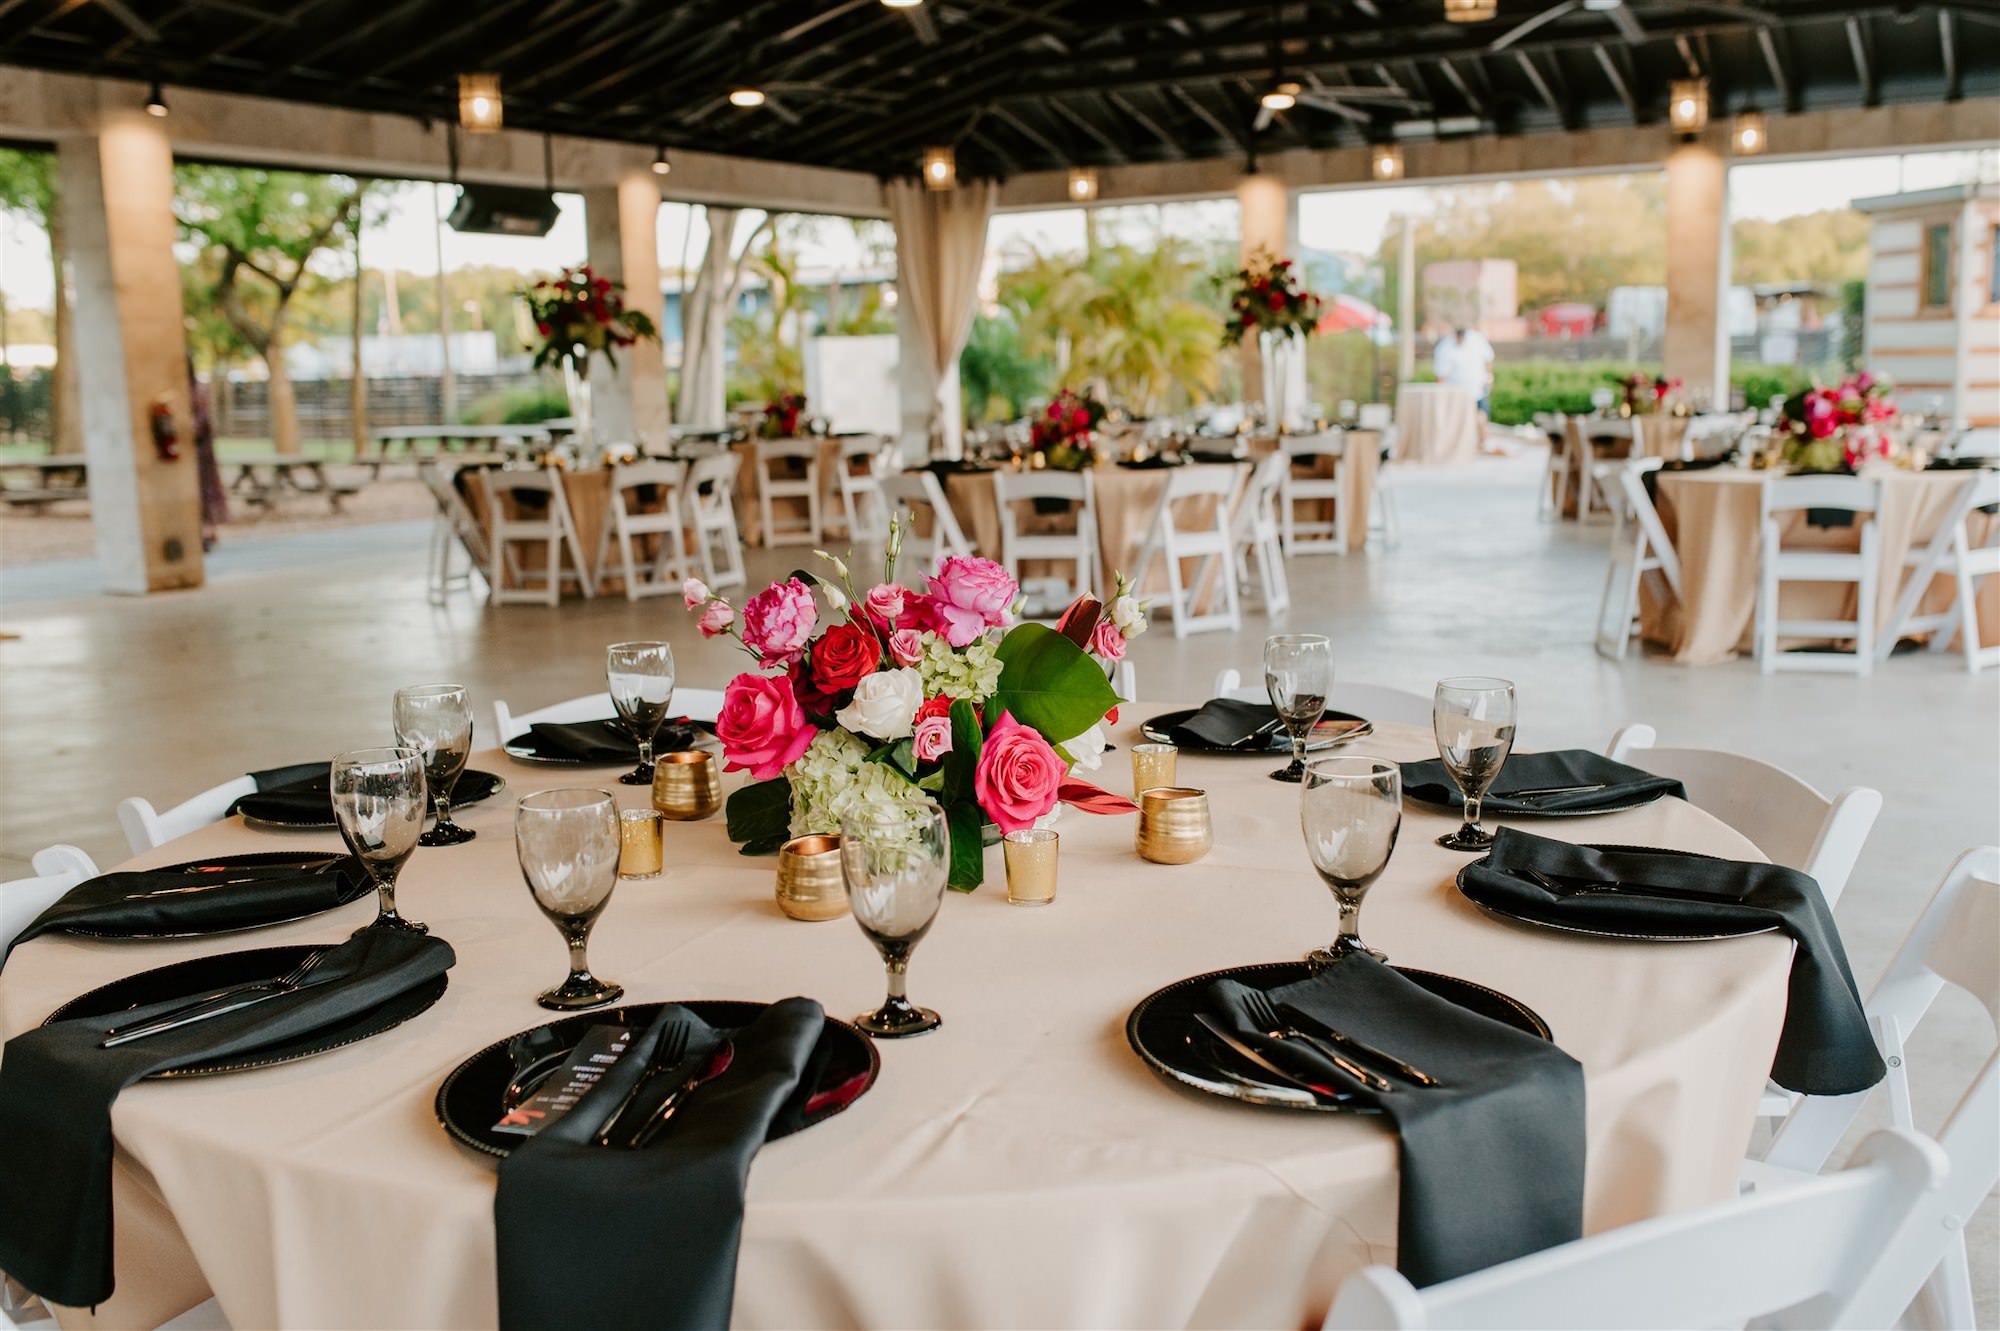 Modern Tropical Wedding Reception Decor Inspiration | Black Chargers, Napkins, and Glassware with Pink Fuchsia Rose and Hydrangea Centerpieces and Champagne Linens | Tampa Bay Rentals Gabro Event Services